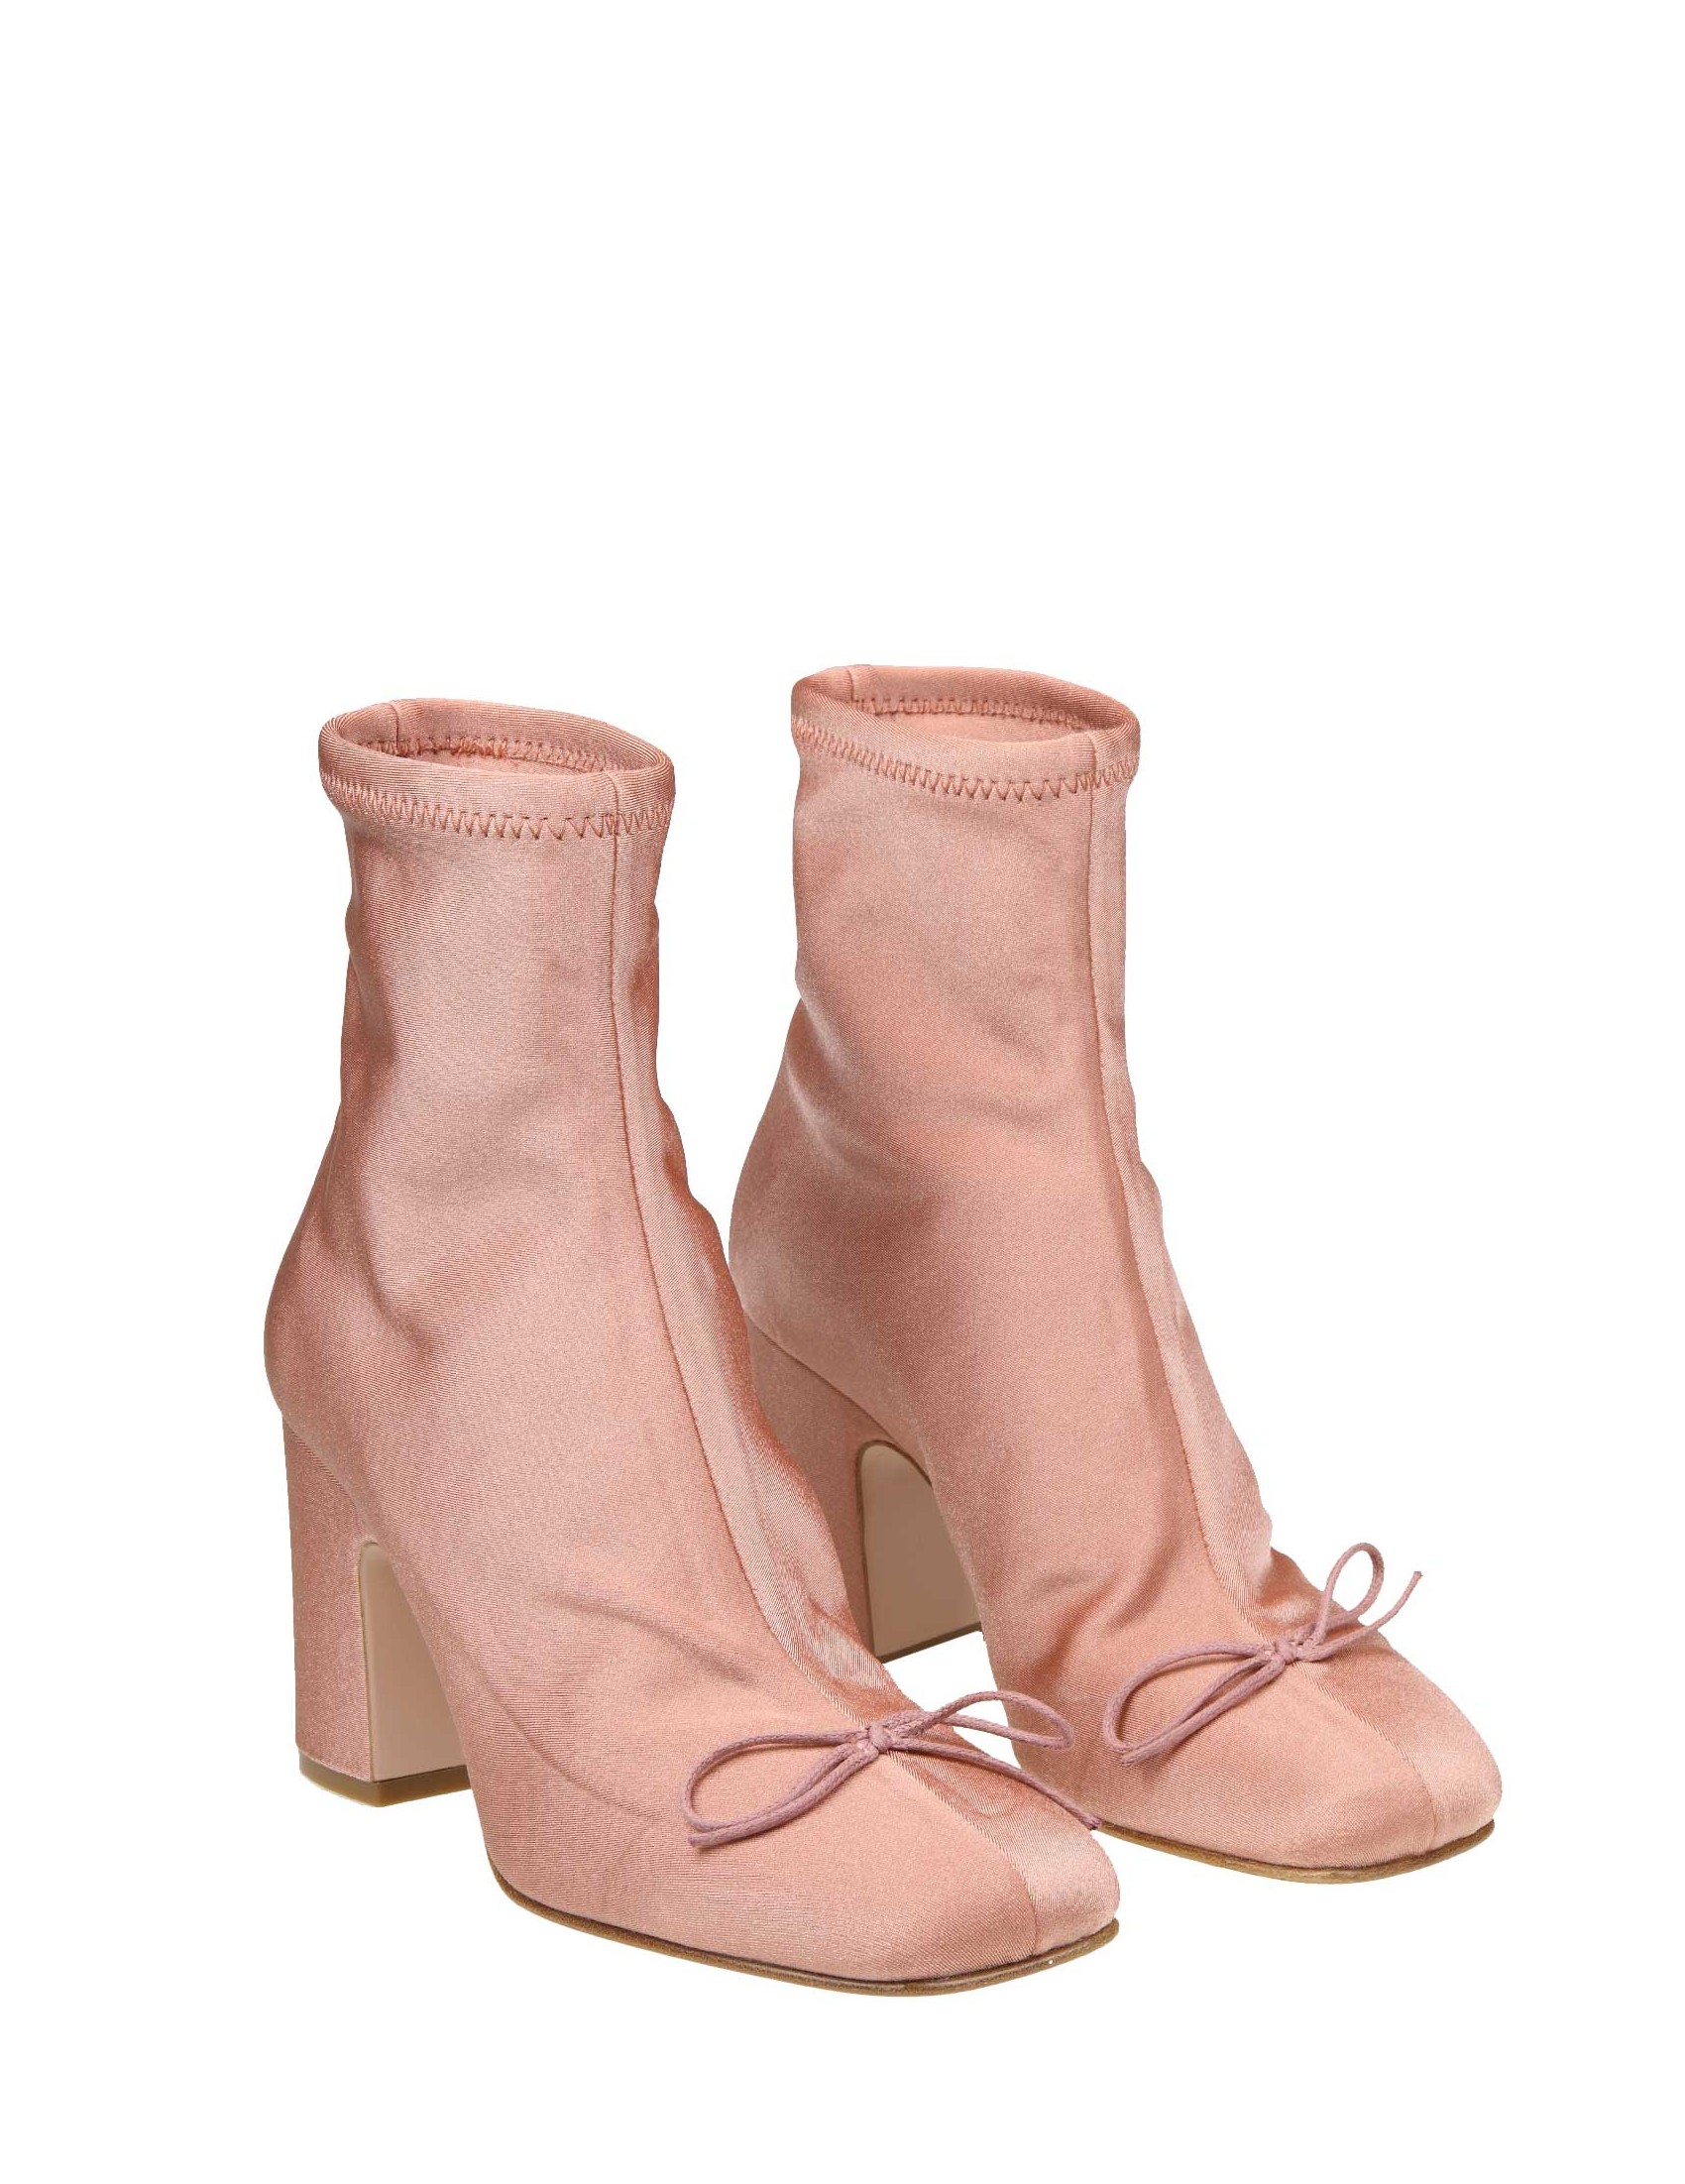 red valentino ankle boots